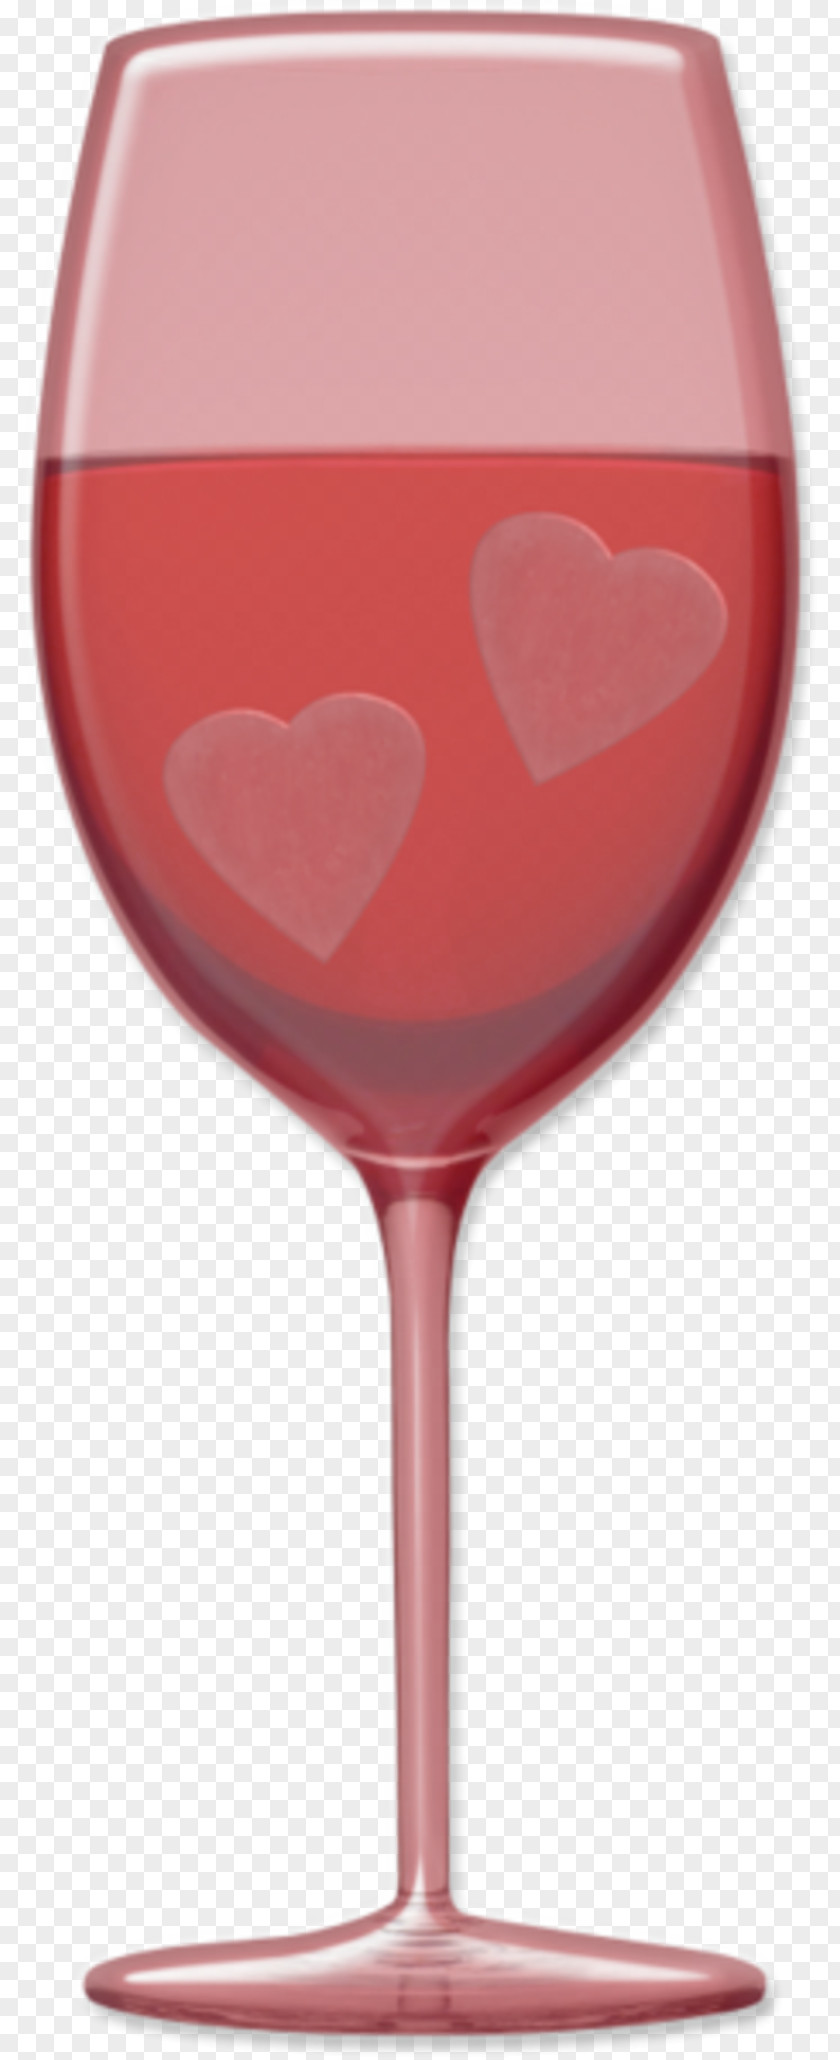 Glass Heart Valentine's Day Clip Art PNG